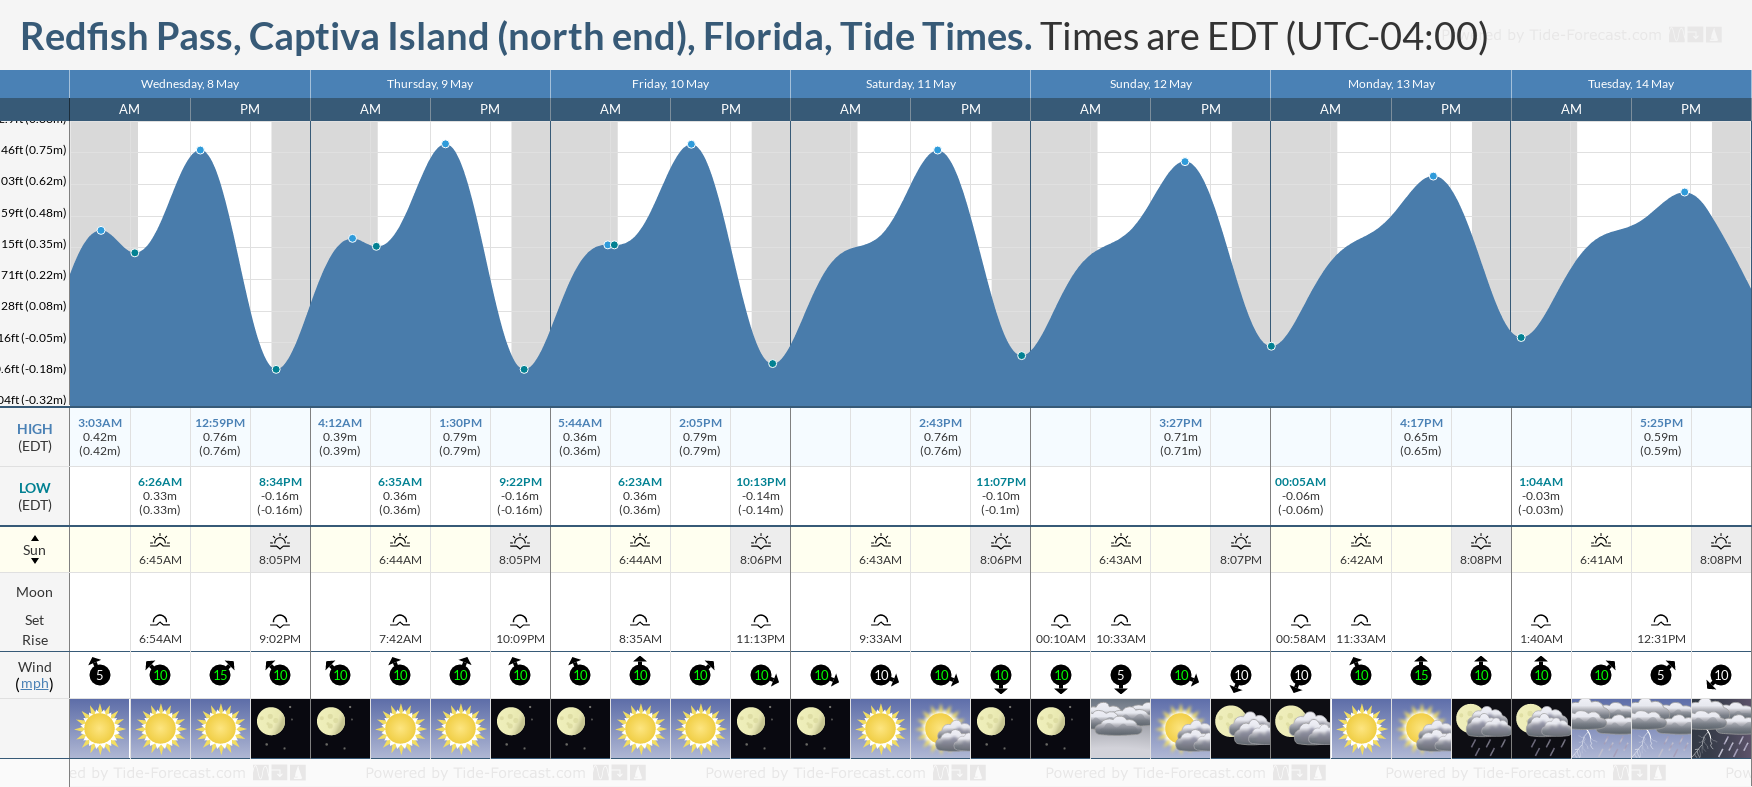 Redfish Pass, Captiva Island (north end), Florida Tide Chart including high and low tide tide times for the next 7 days